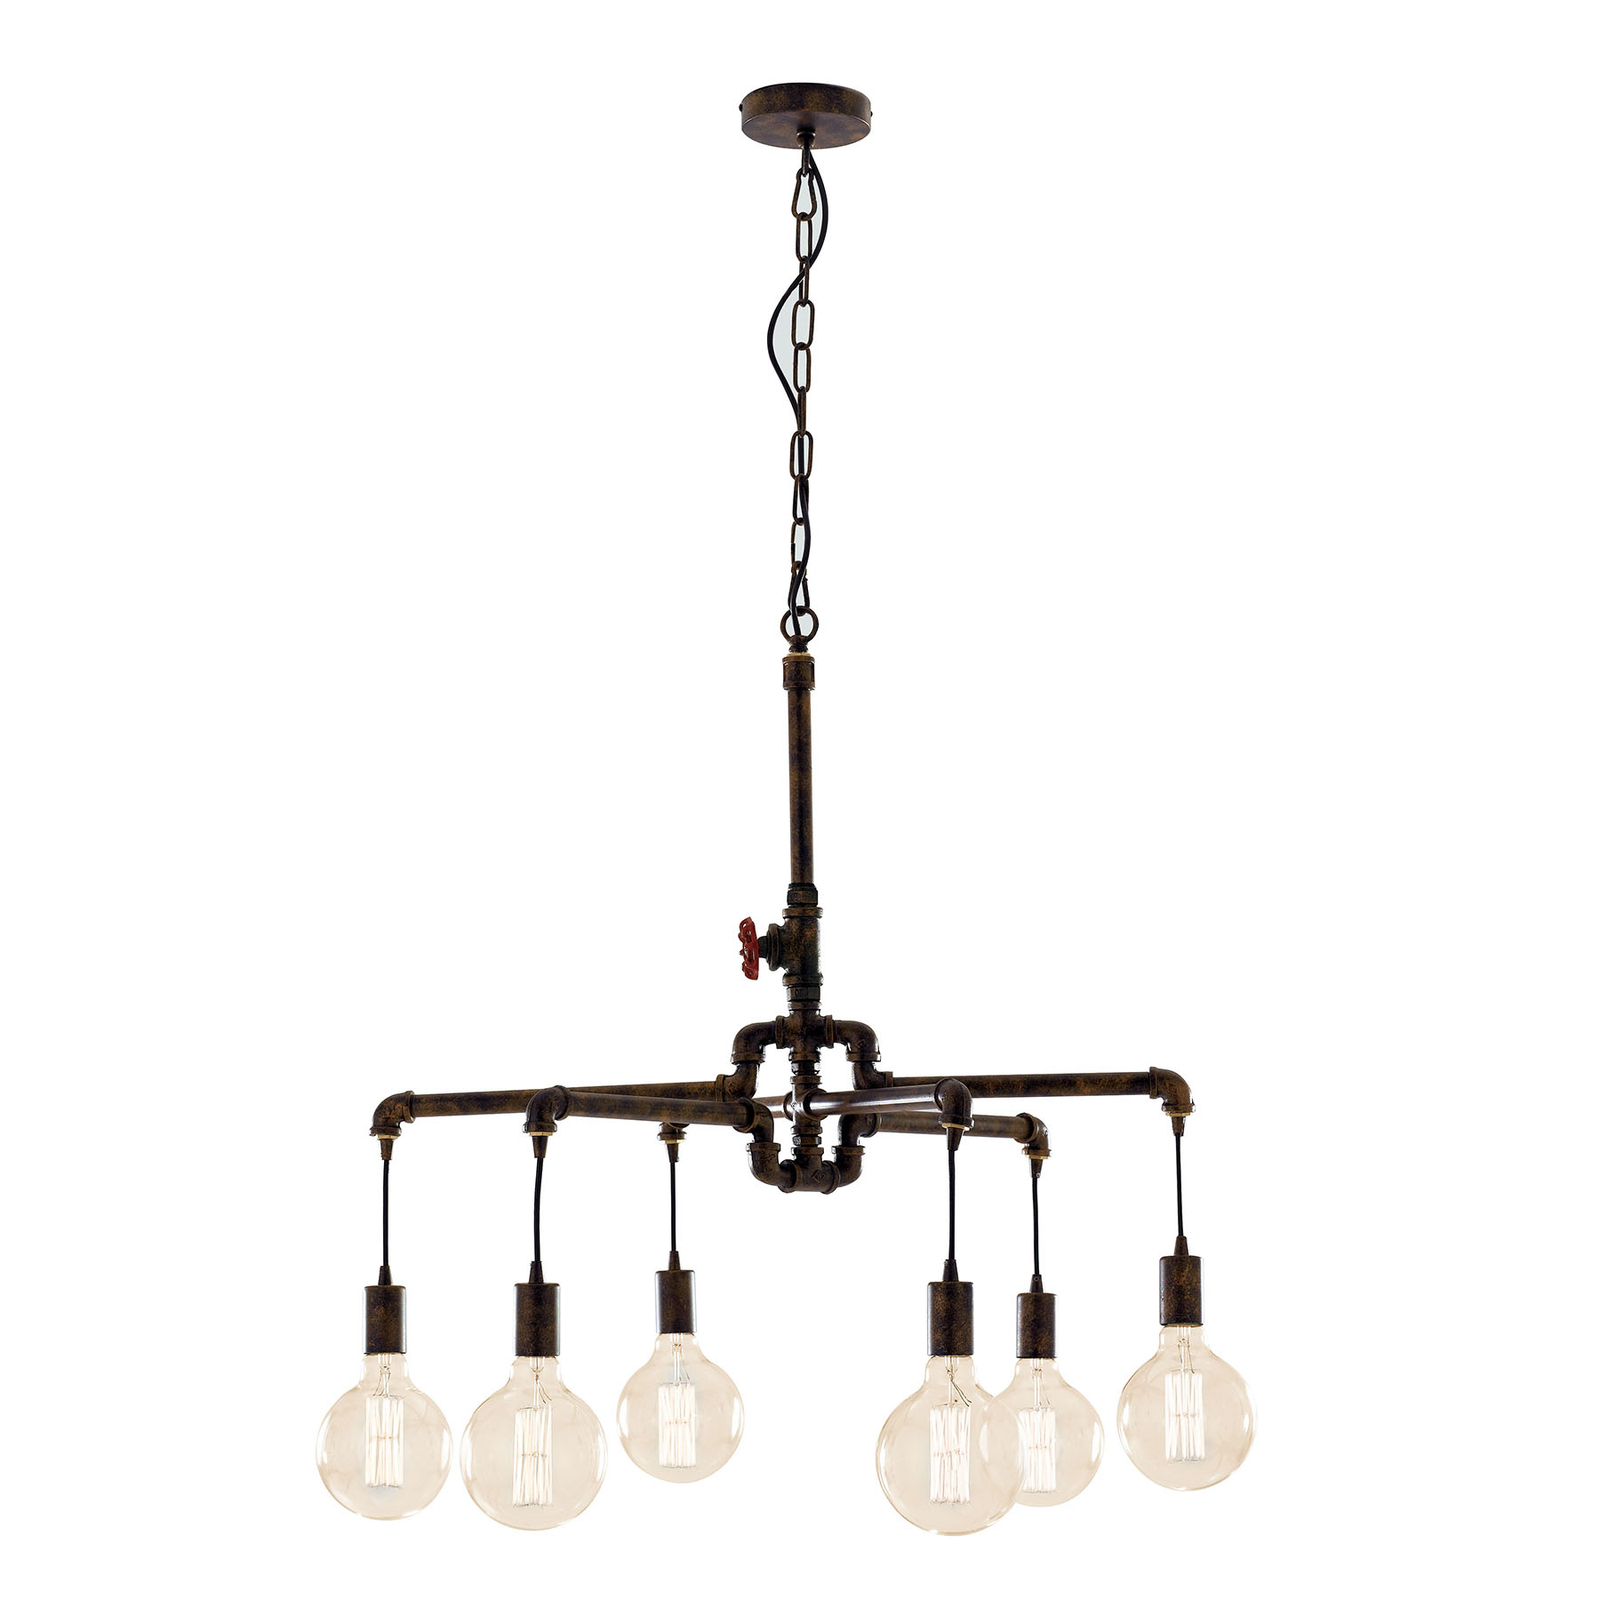 Hanglamp Amarcord, roestbruin, 6-lamps